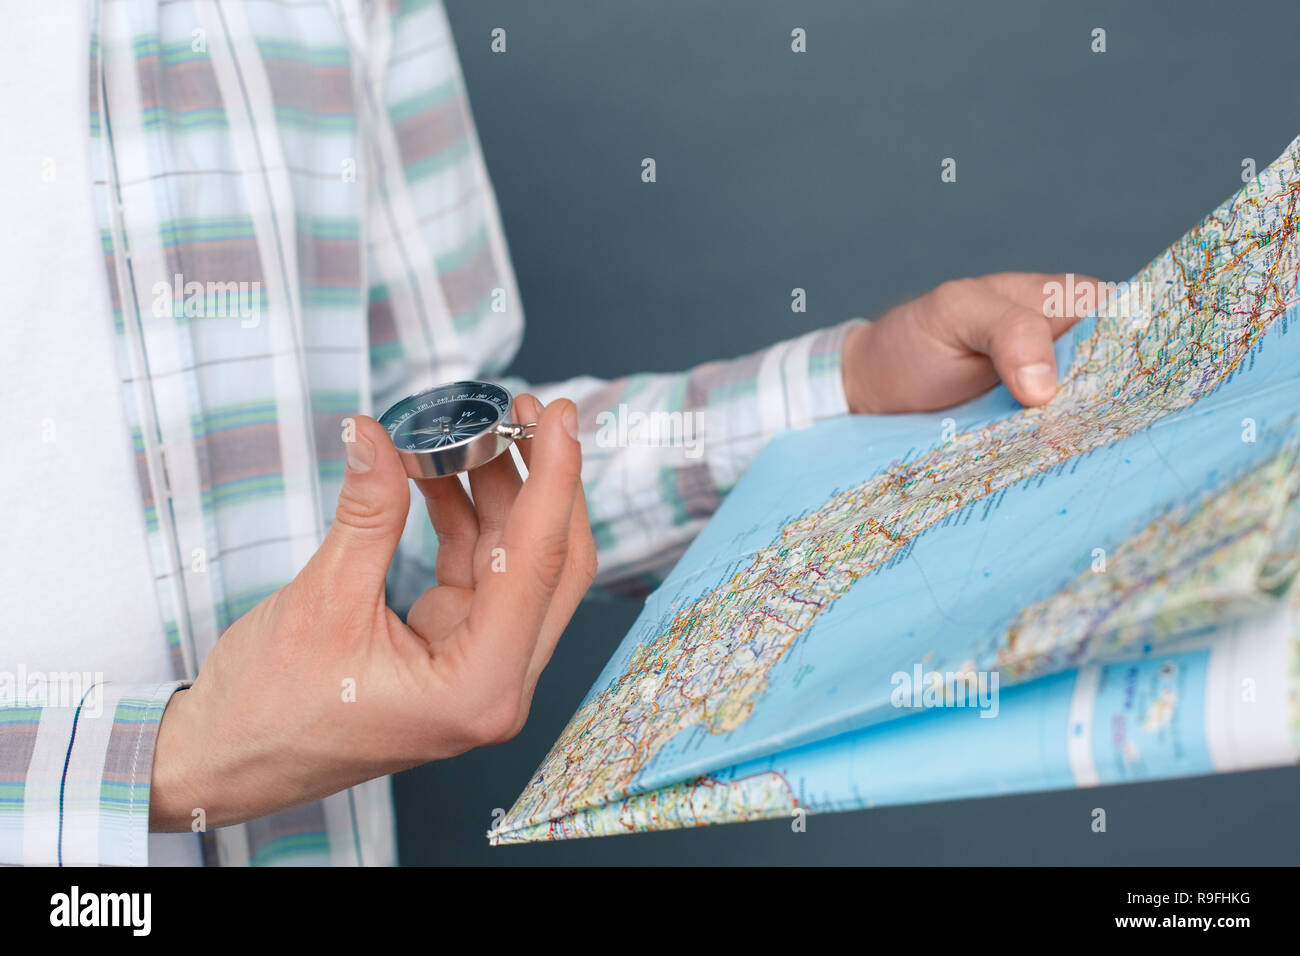 Young guy isolated on gray wall tourism concept standing holding map looking at compass needle close-up Stock Photo